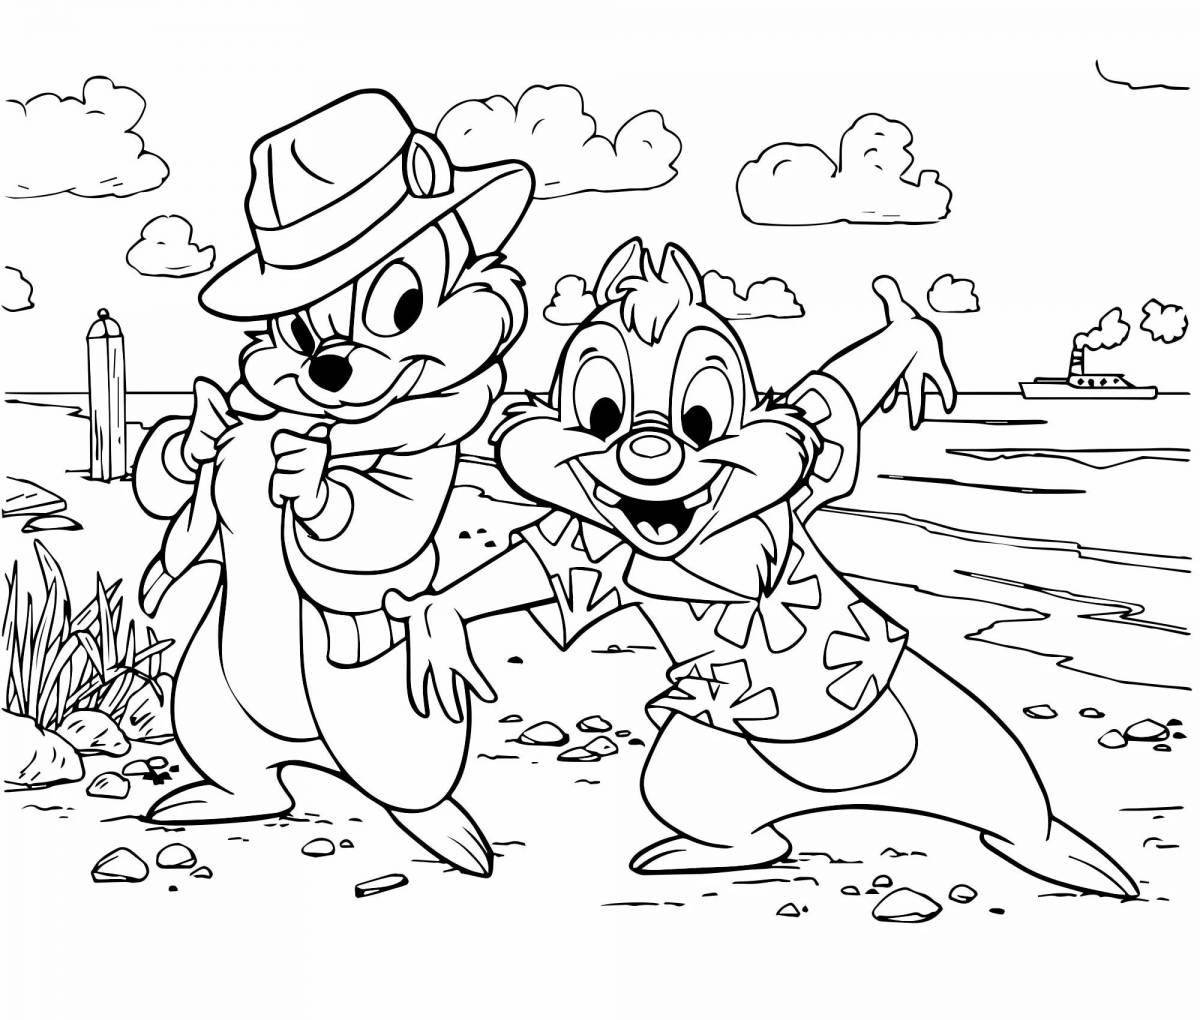 Great coloring book popular with kids